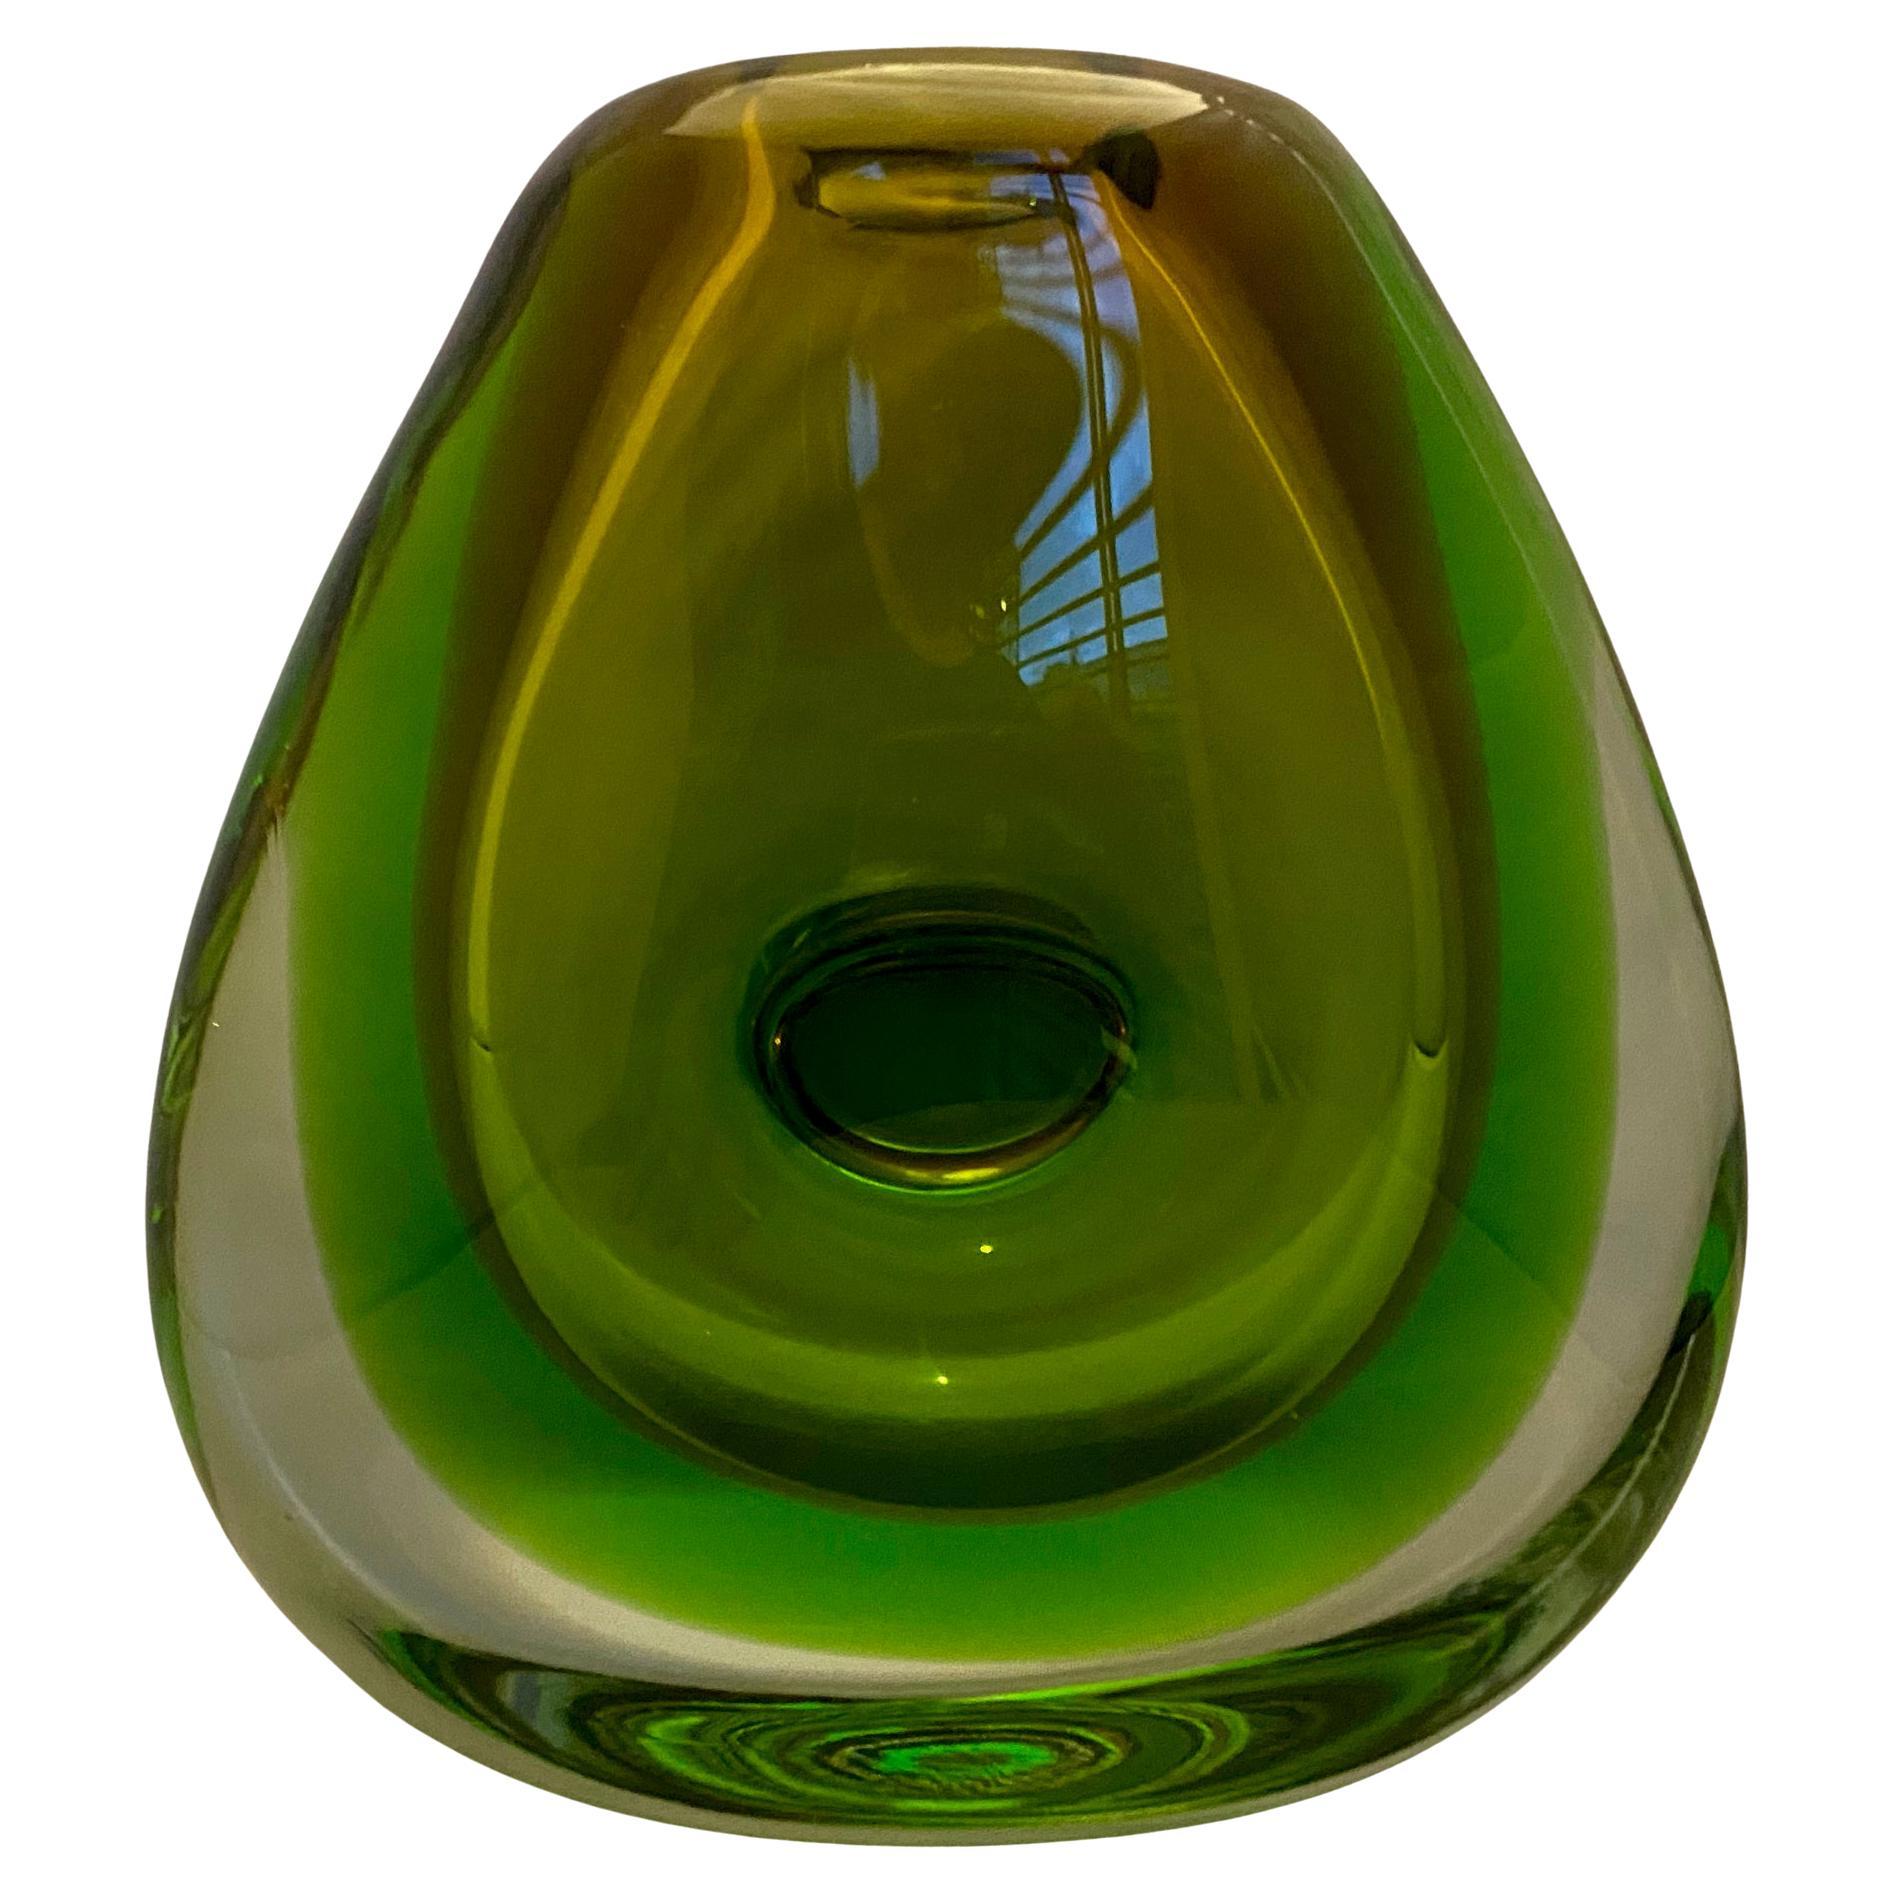 Heavy, thick and beautifully made mid century green glass vase. 